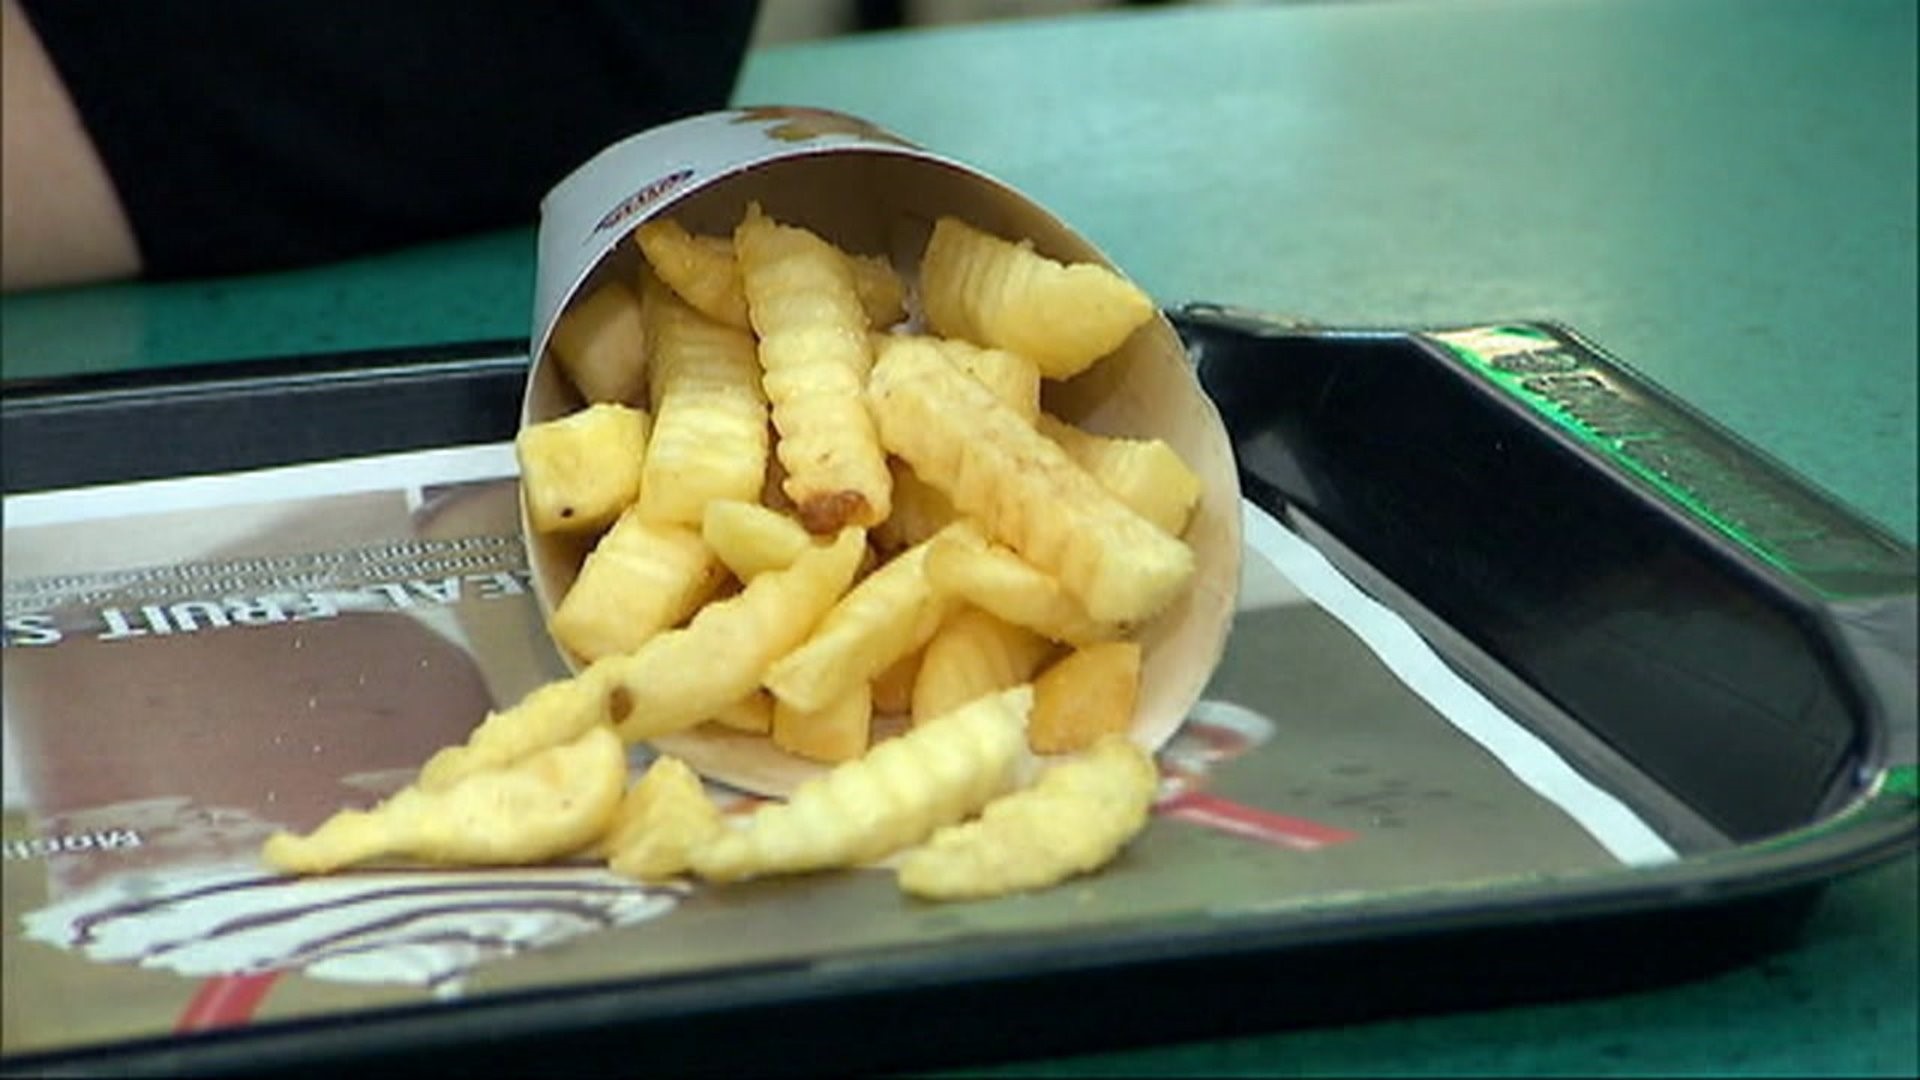 U.S. May Face Fry Shortage Due to Poor Potato Crop, Report Says